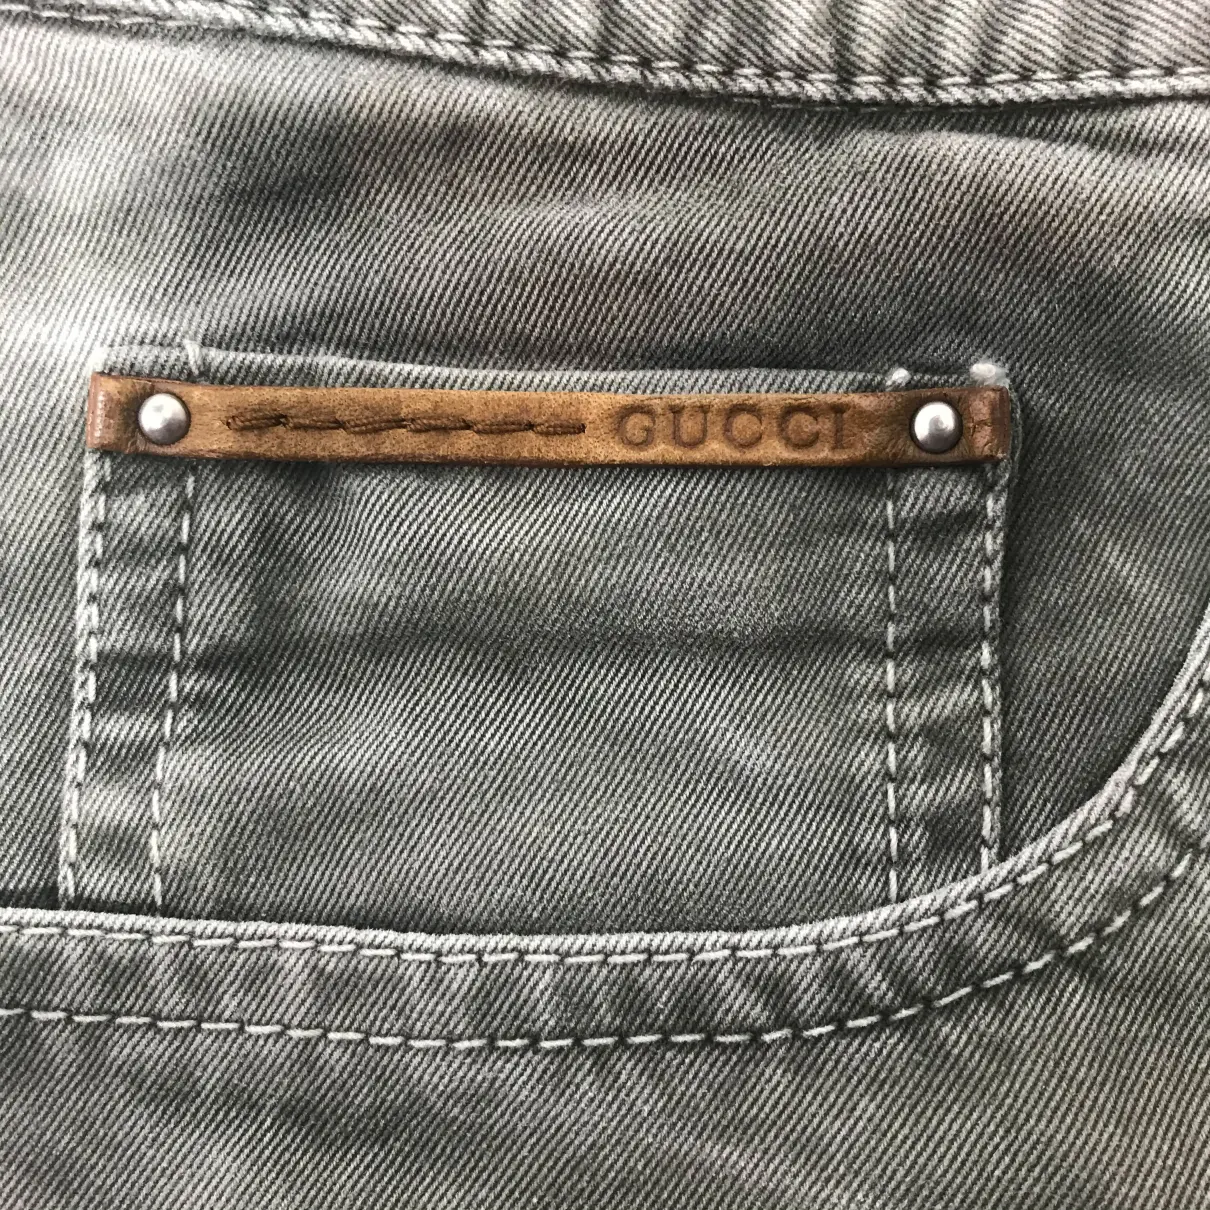 Trousers Gucci - Vintage